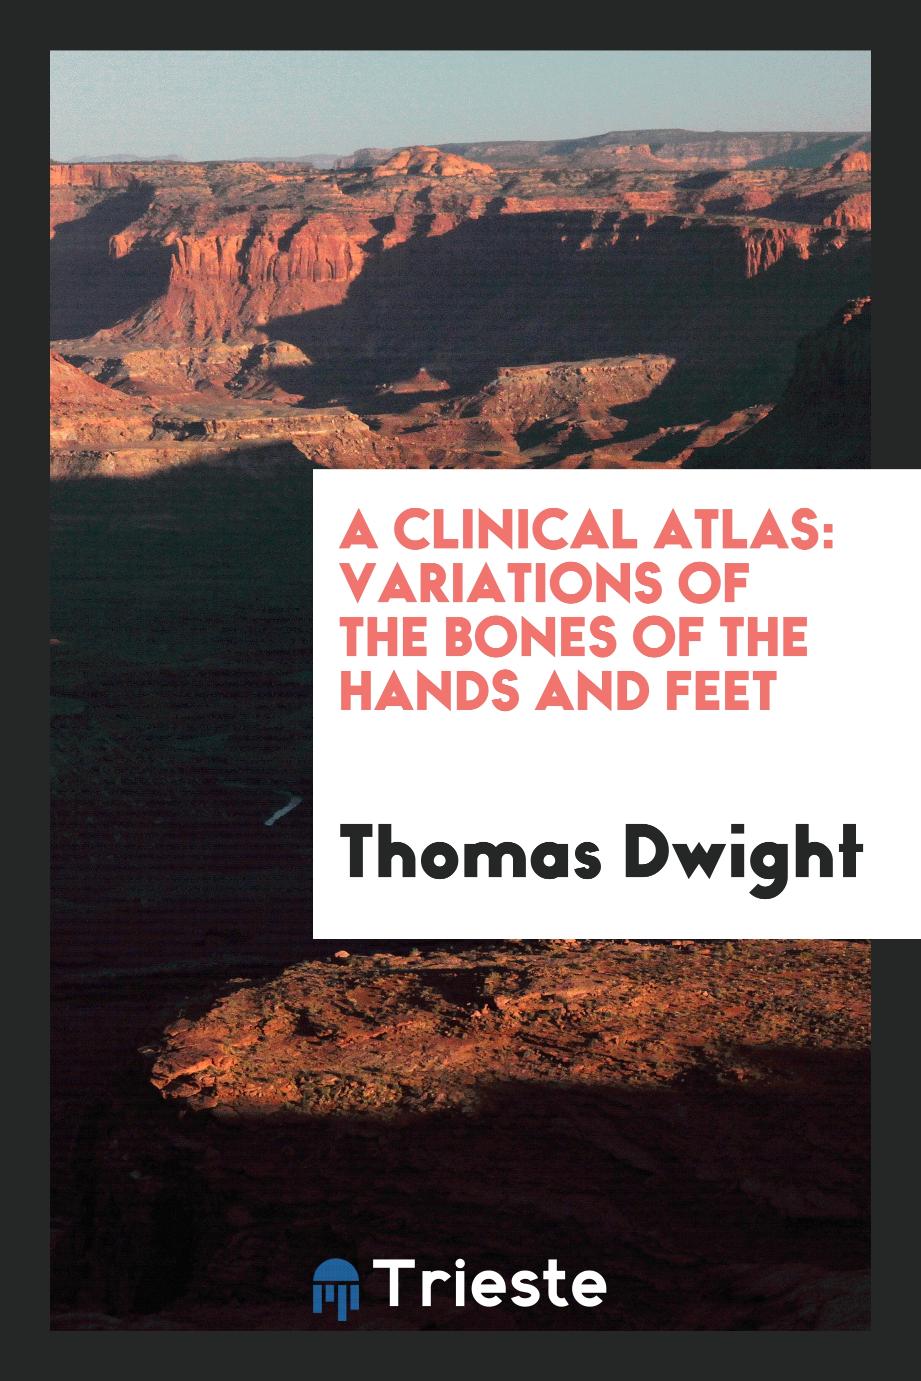 A Clinical Atlas: Variations of the Bones of the Hands and Feet